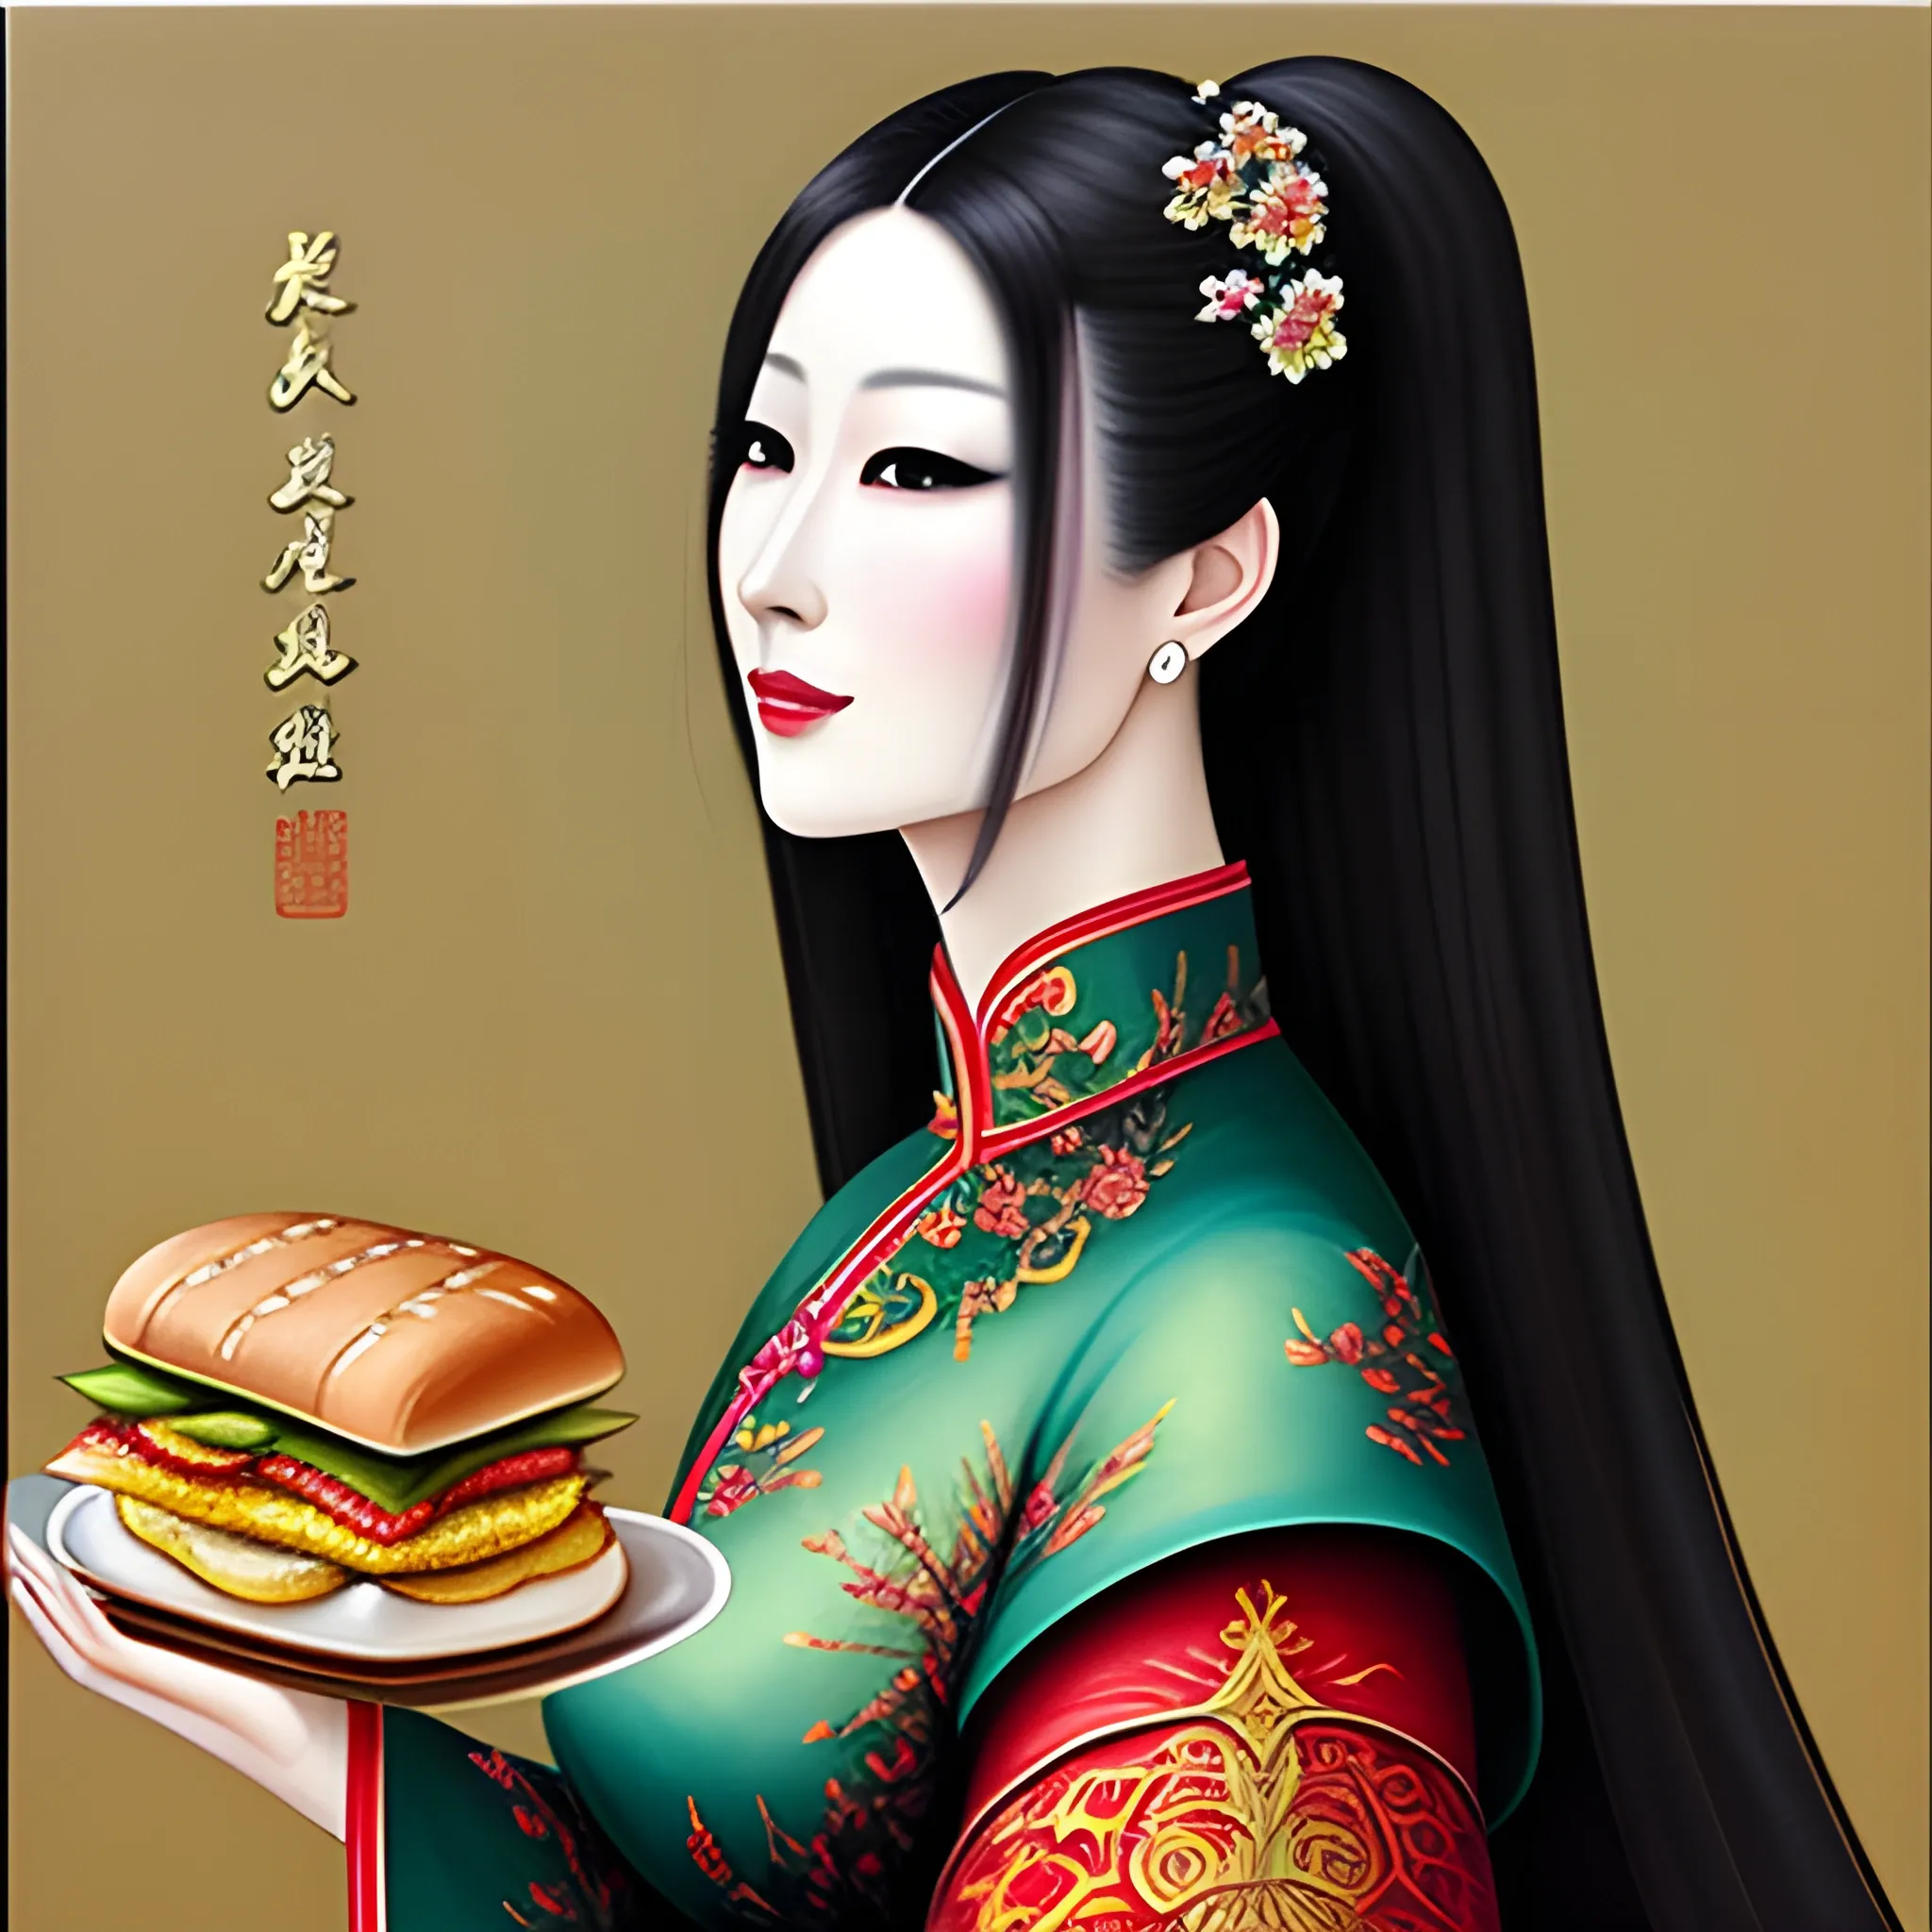 Oil painting art girl, Chinese beauty, colorful, realistic, high quality with a sandwich, Water Color